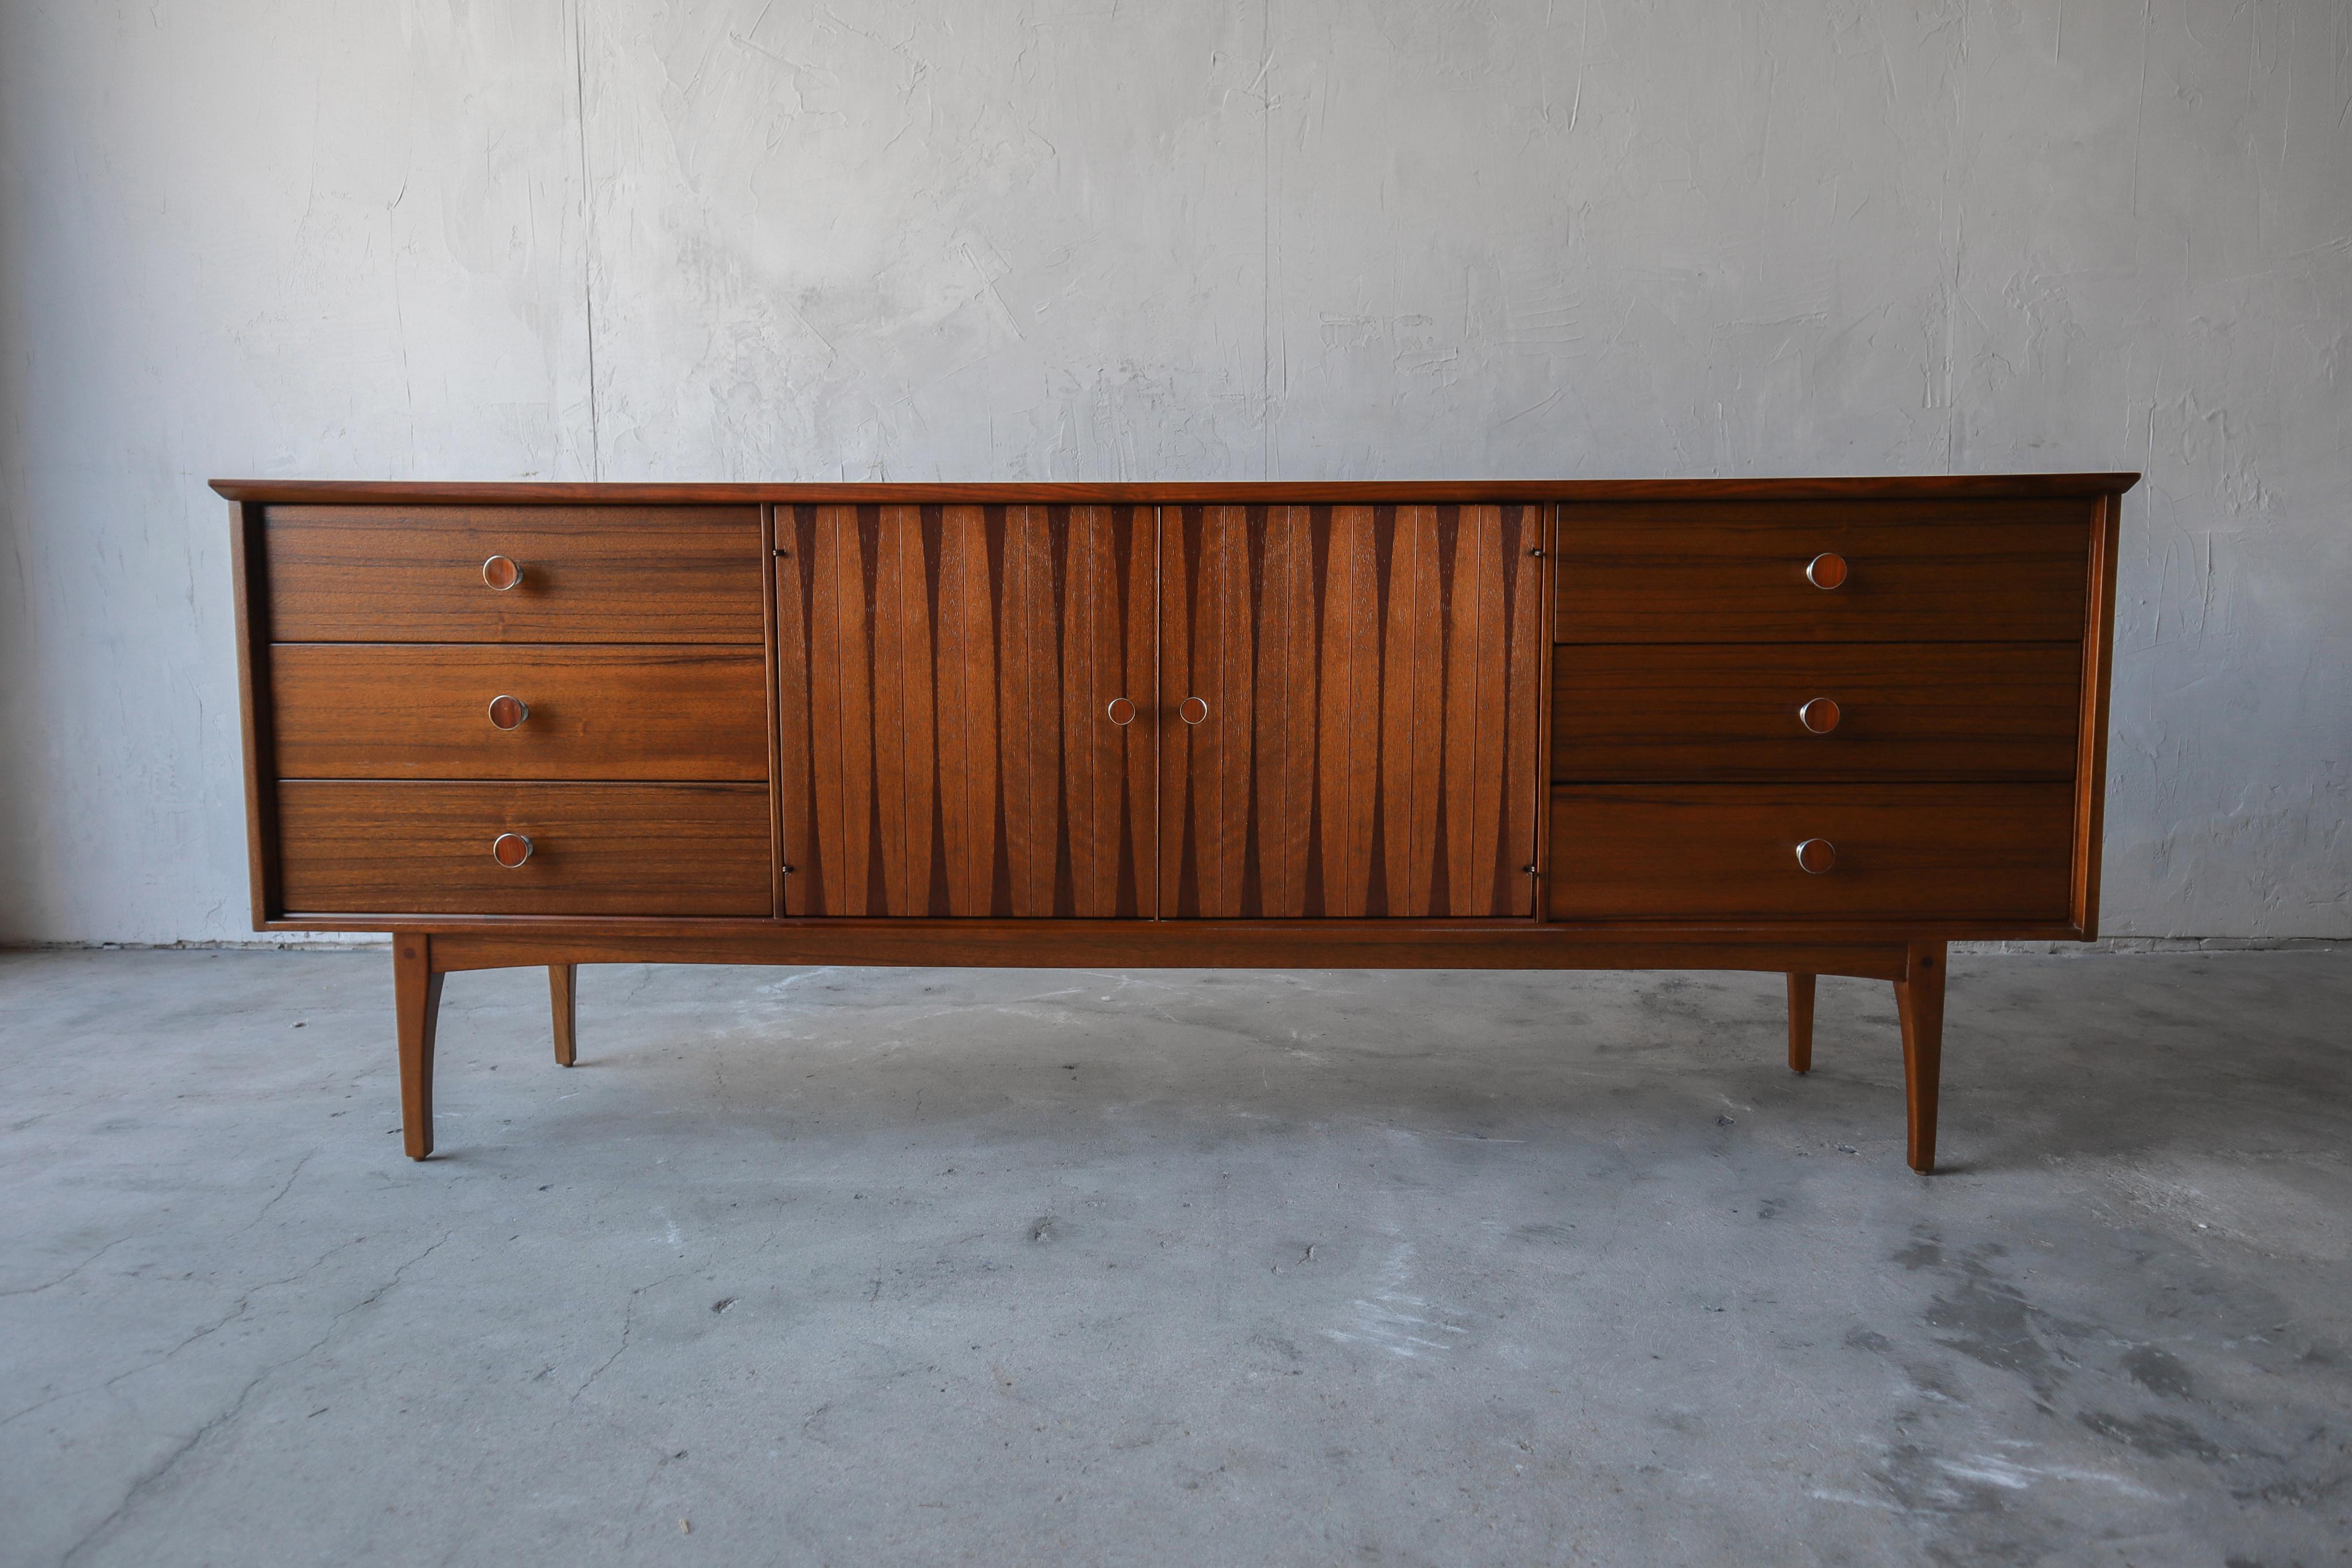 Super rare and early midcentury, 6 drawer dresser by Lane. The dresser is absolutely beautiful. It's a stunning combination of walnut and rosewood with brass pulls that too are inlaid with rosewood. This dresser is beautiful enough to be used in a